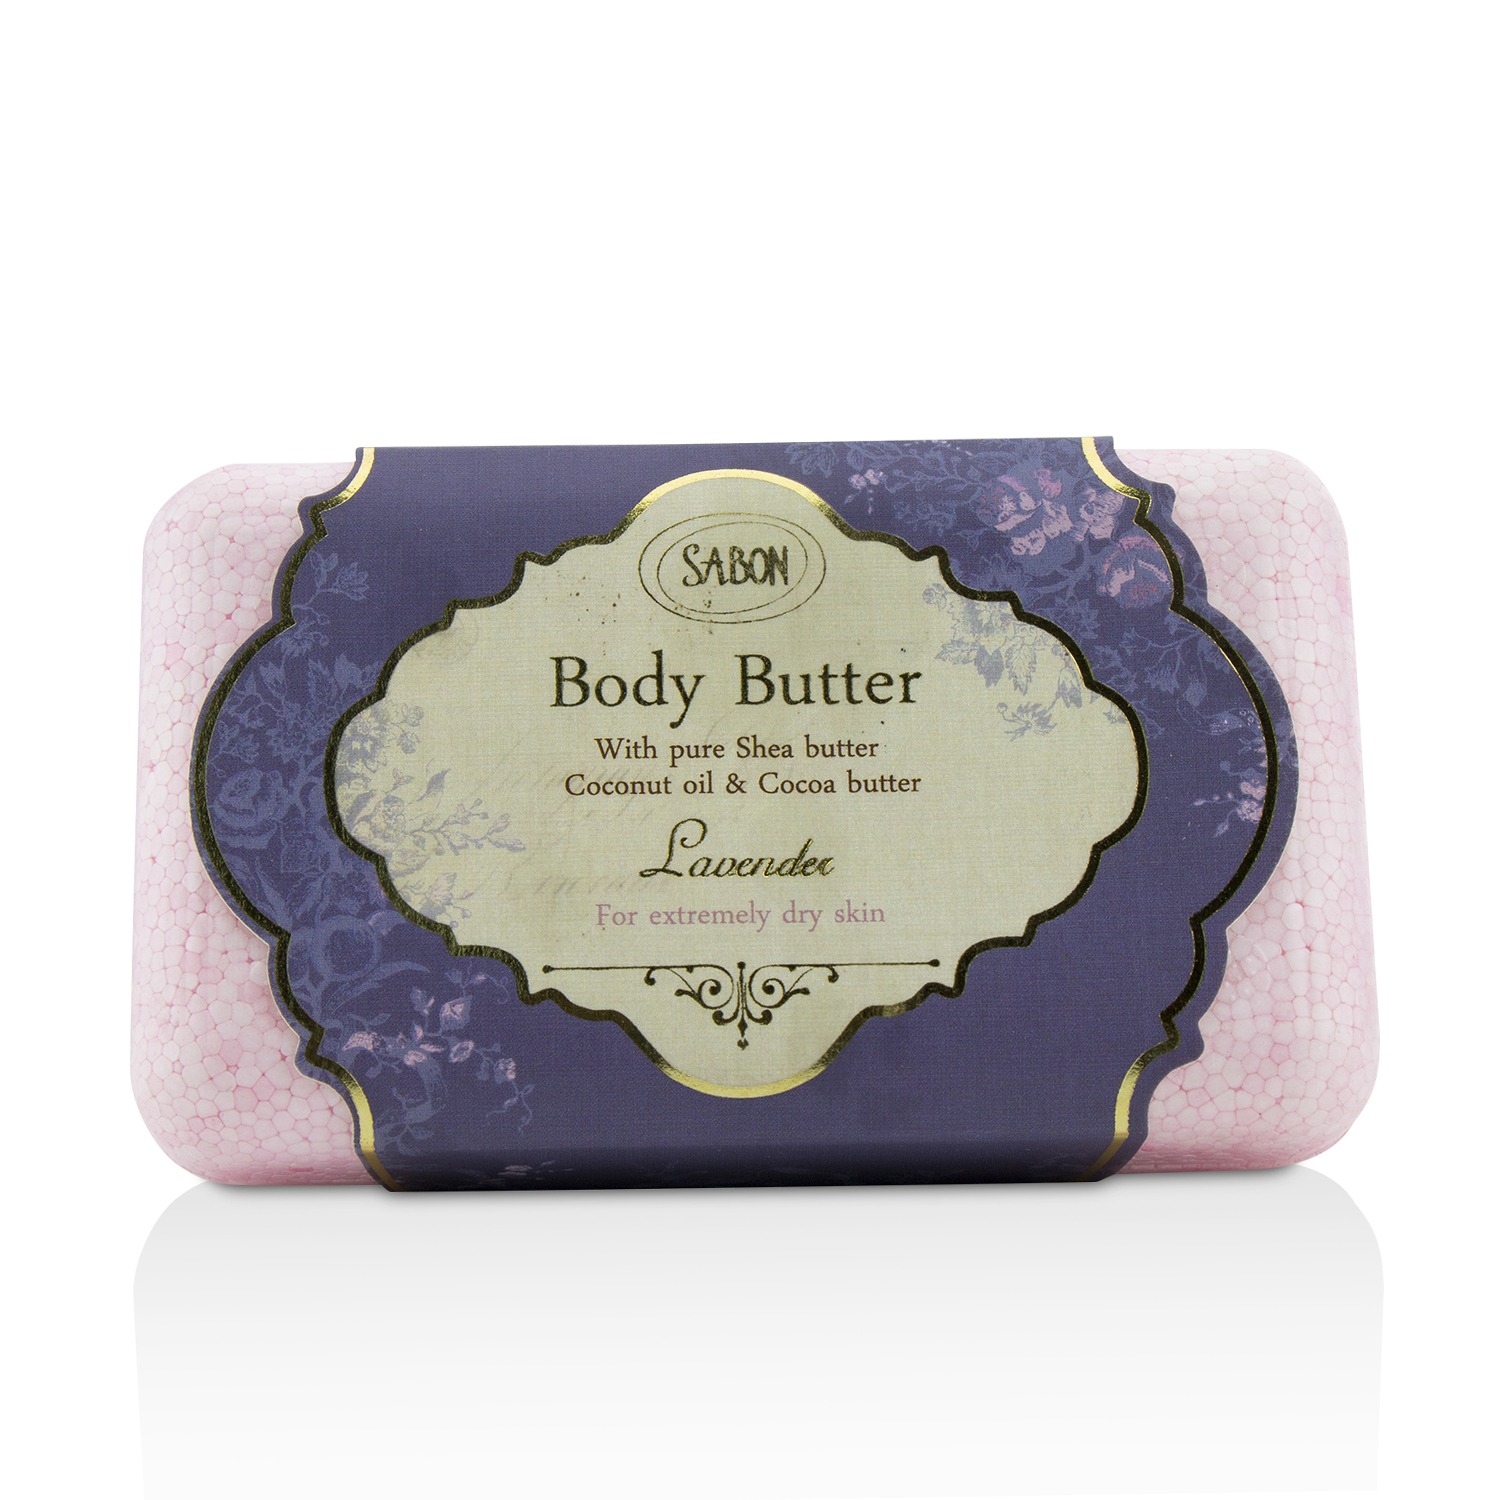 Body Butter (For Extremely Dry Skin) - Lavender Sabon Image